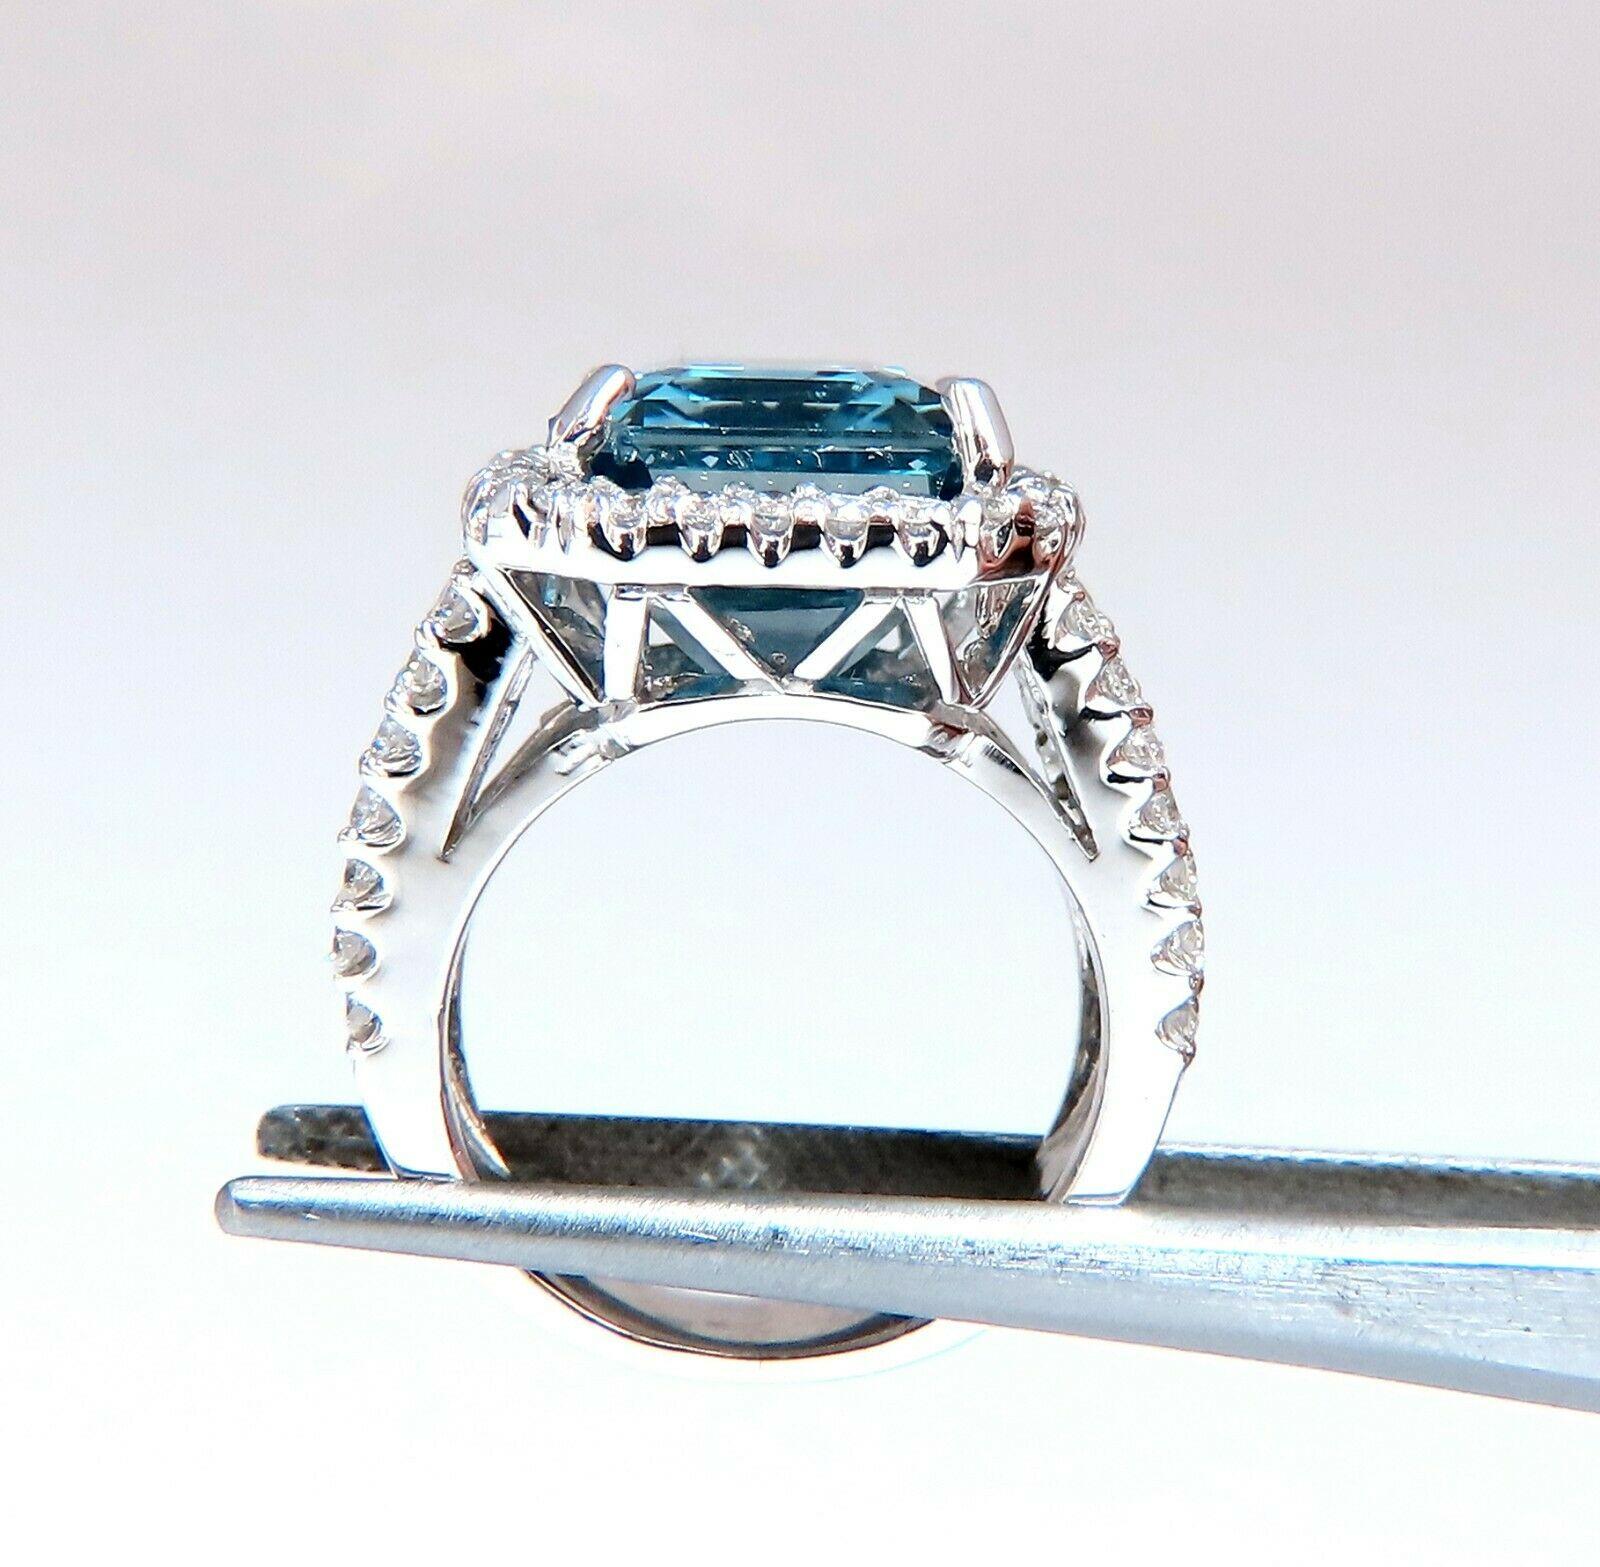 15.00ct. Natural Emerald cut Swiss Blue Topaz Ring 

Topaz: 14 x 11.5mm

Emerald Full cut brilliant 

Transparent and Clean Clarity 

2.40ct. Side natural round white diamonds:

G- Color, Vs-2 clarity.

14kt. White gold

13.5 grams

Ring Current